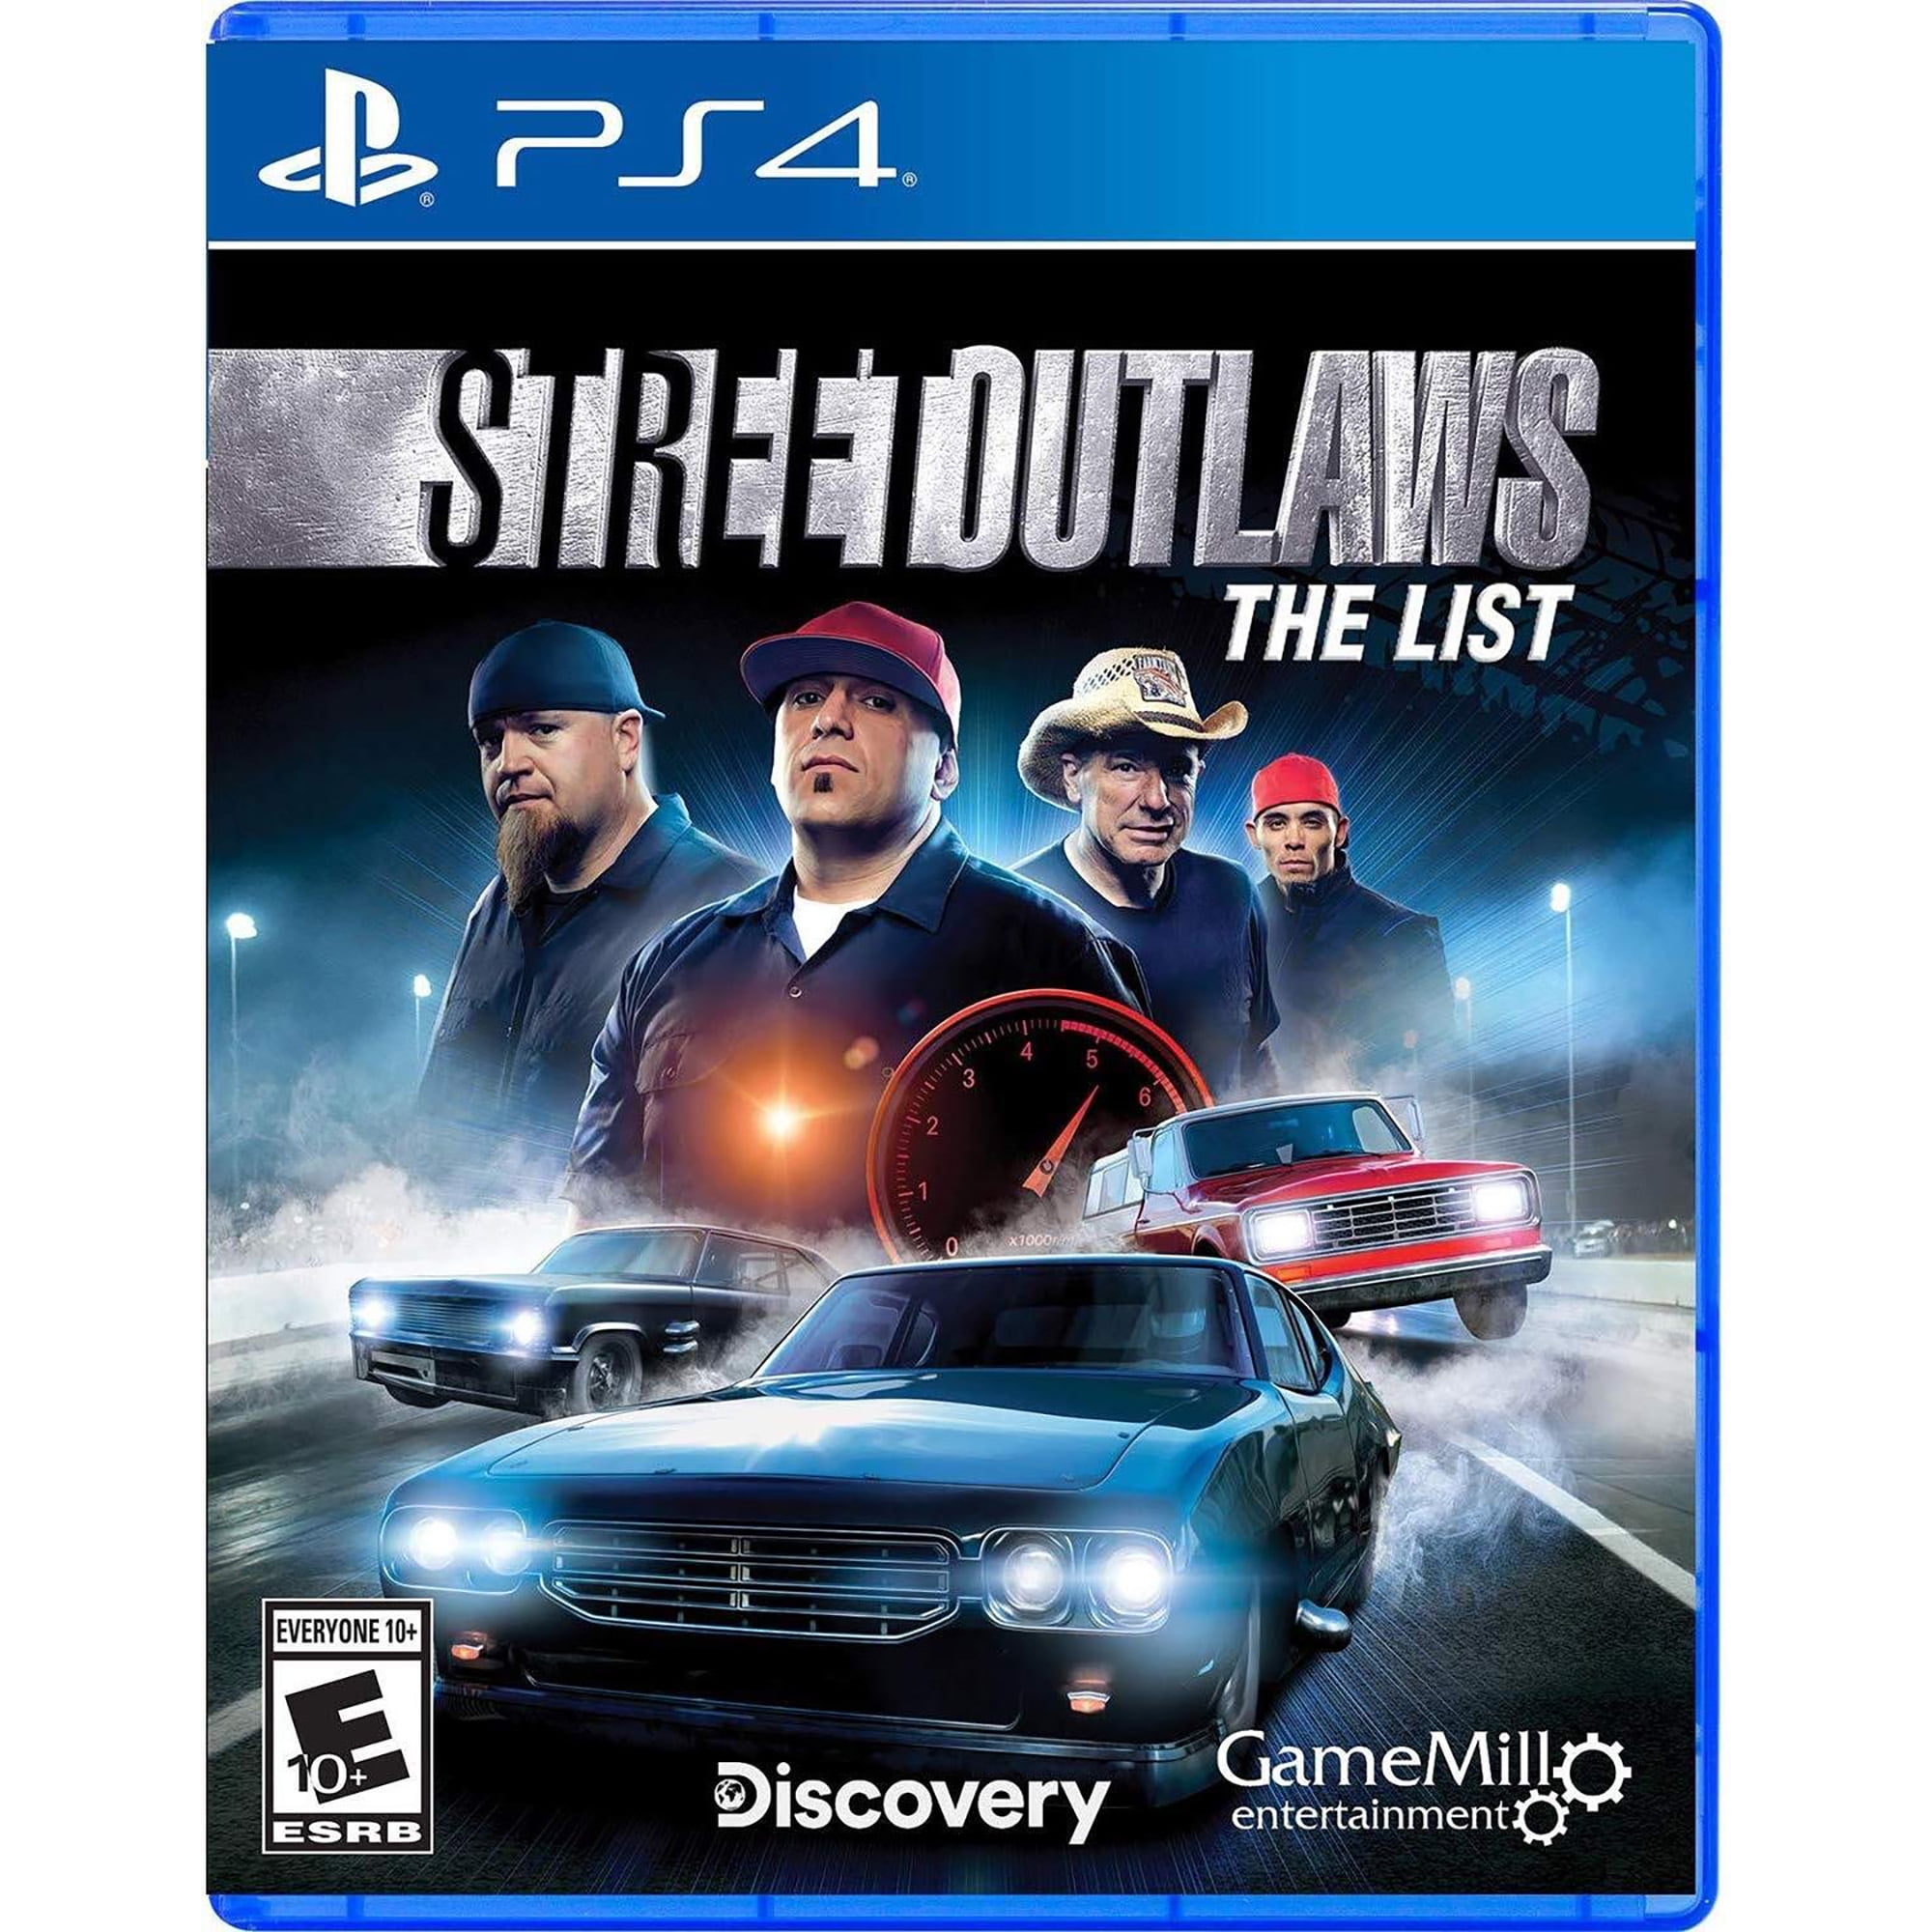 GameMill Street Outlaws, Madcow, PlayStation 4, [Physical]